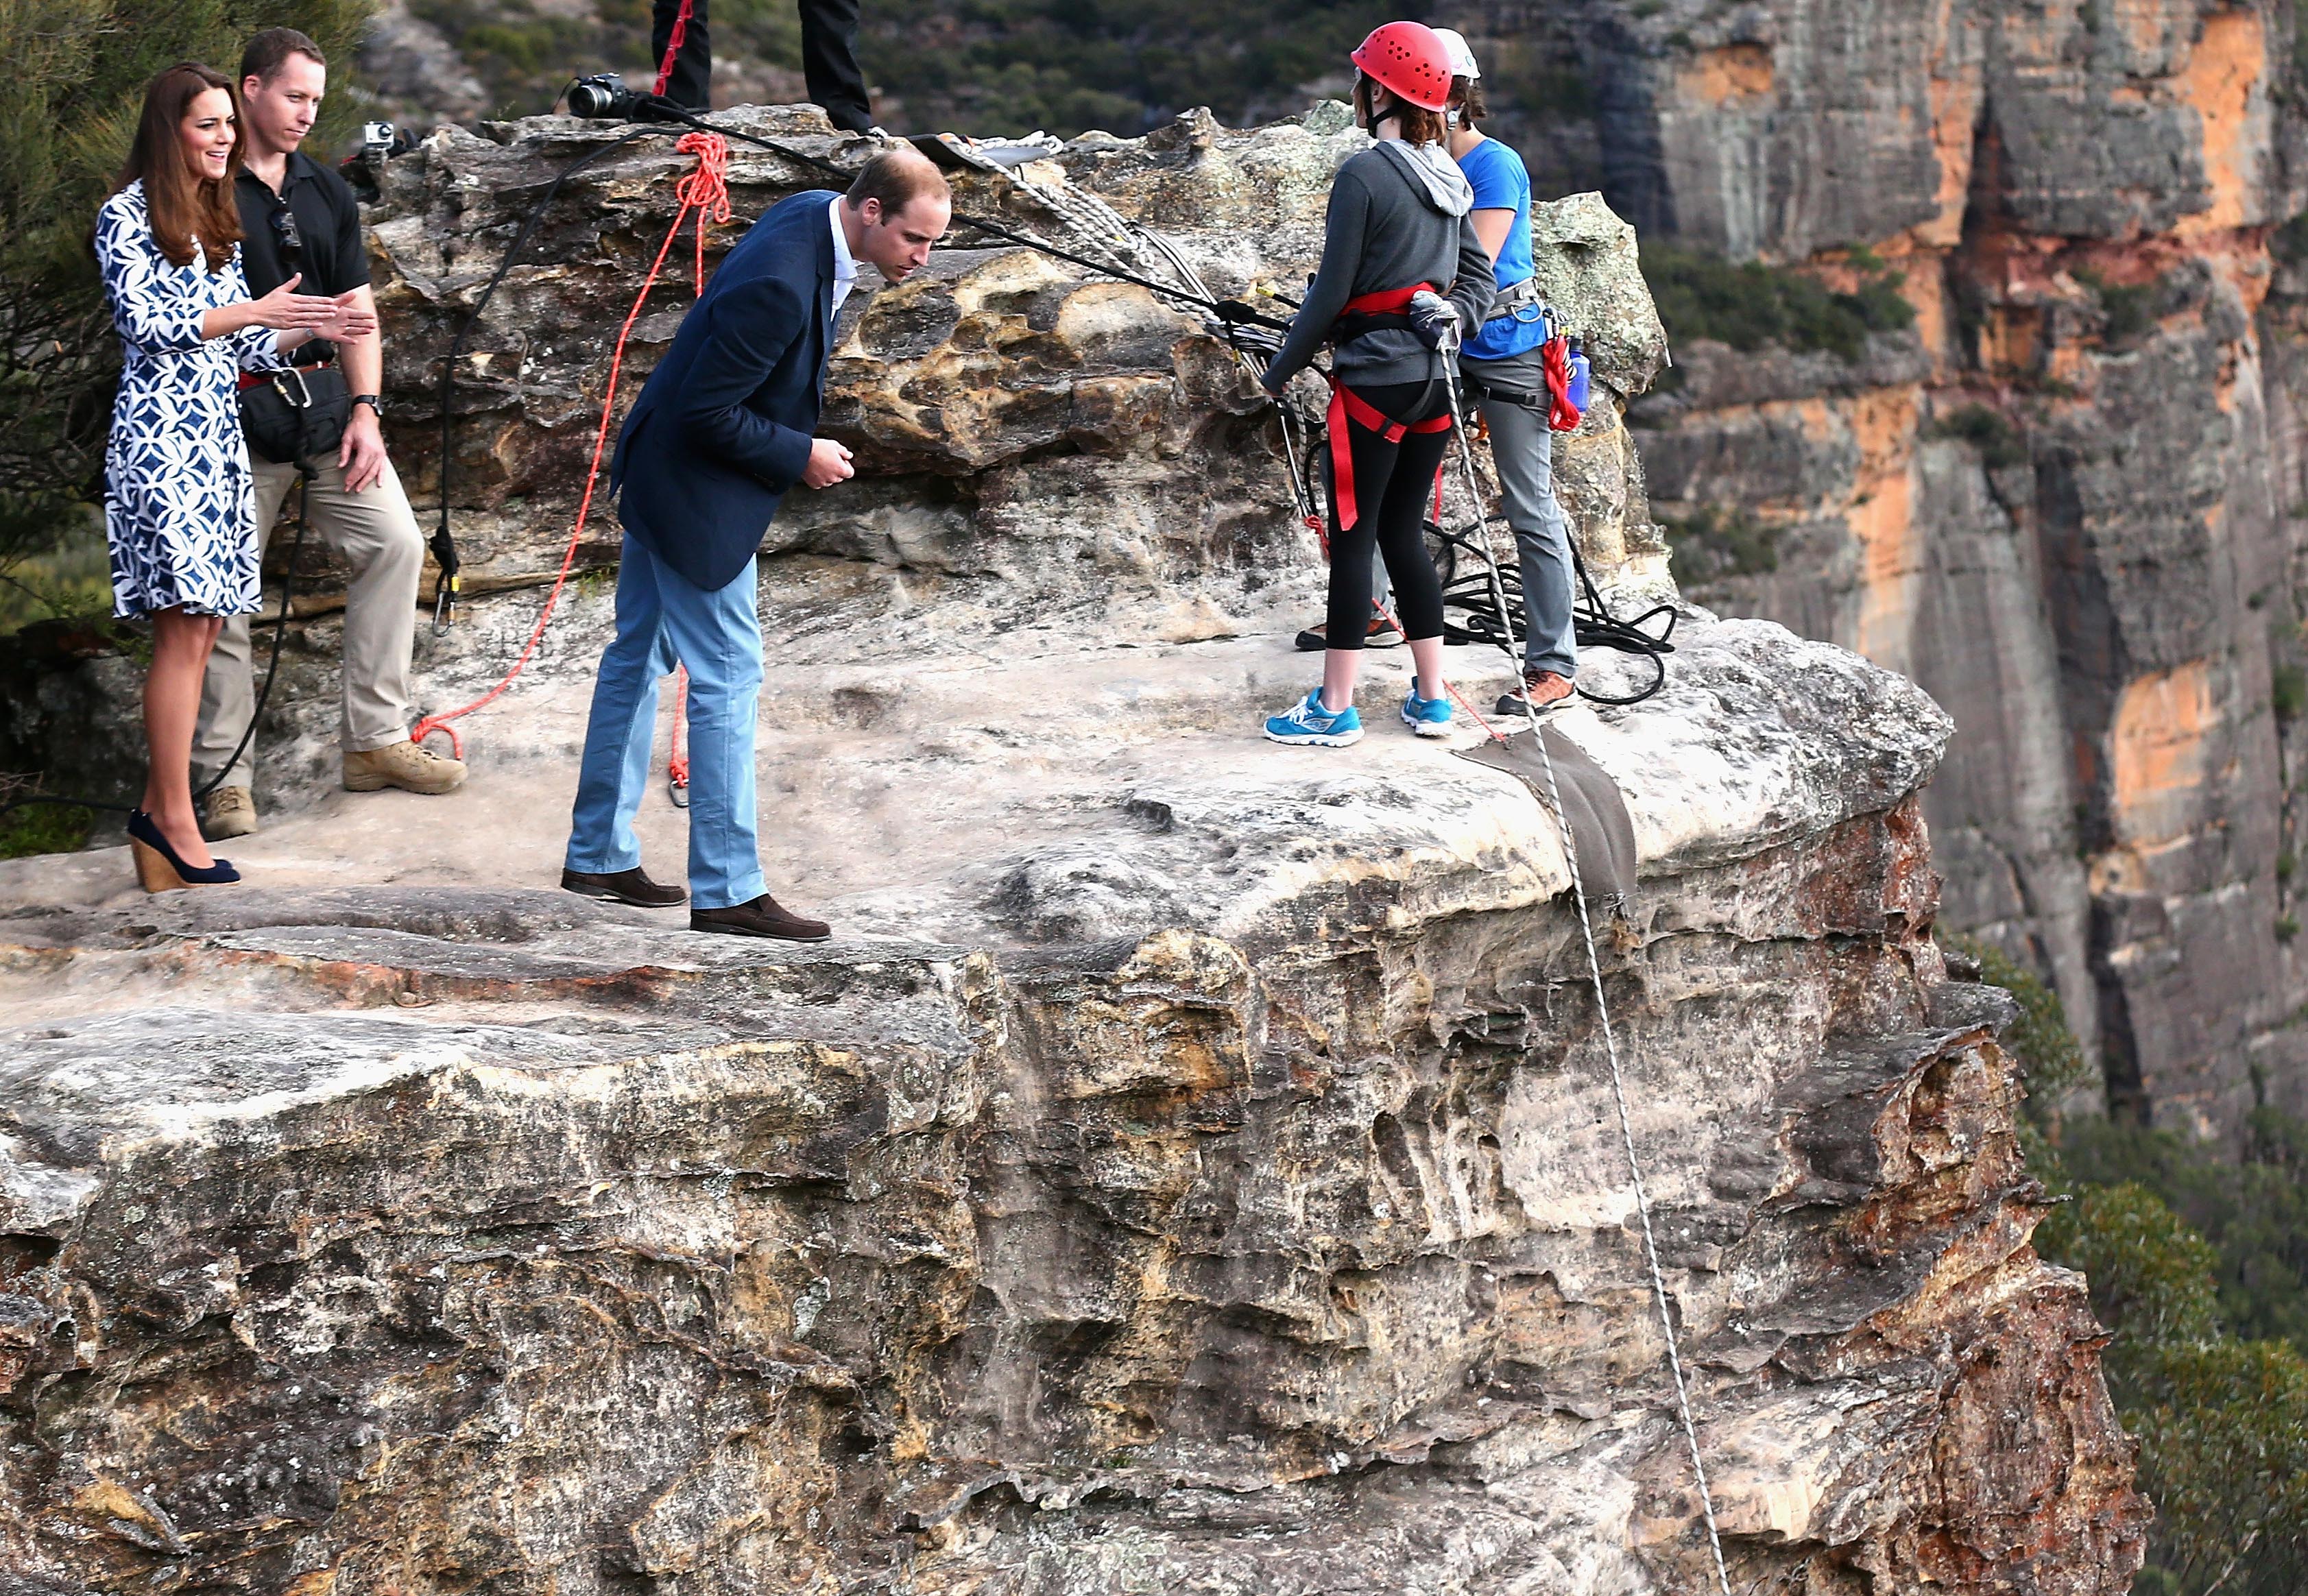 Britain's Prince William, third left, looks over the cliff edge as he and his wife Kate, the Duchess of Cambridge, left, observe abseiling and team building exercises at Narrow Neck Lookout near Katoomba, Australia, Thursday, April 17, 2014. (Ryan Pierse / AP)